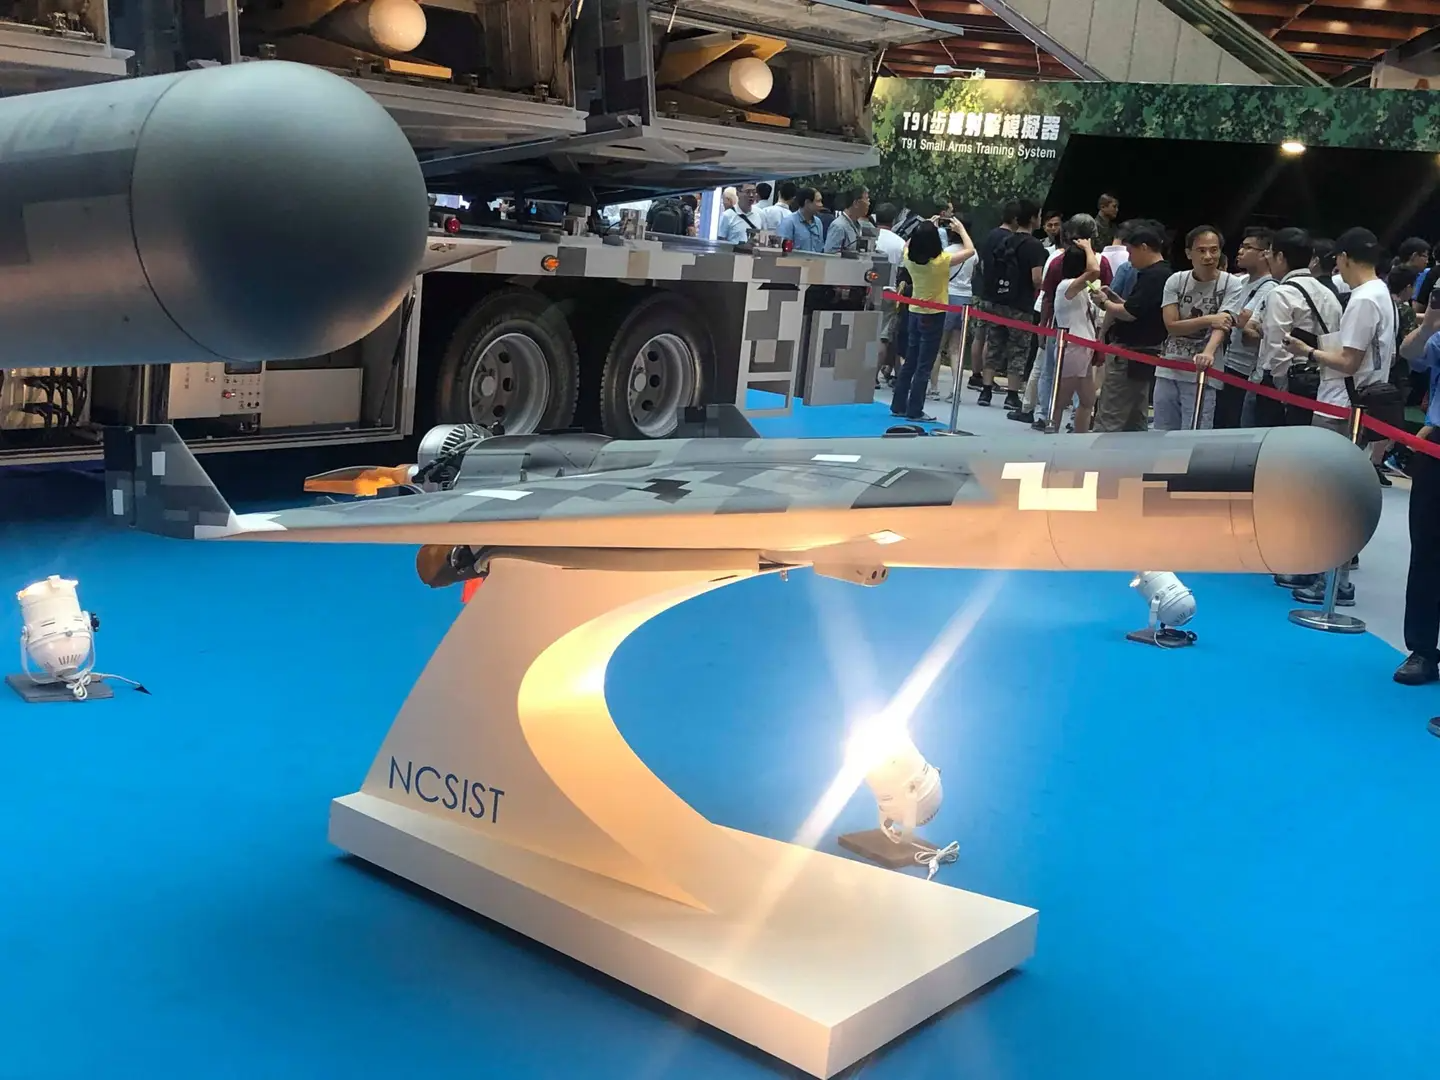 Taiwan's Chien Hsiang loitering munition on display at the 2019 Taipei Aerospace &amp; Defense Technology Exhibition. (Credit: Kenchen945/Wikimedia Commons)